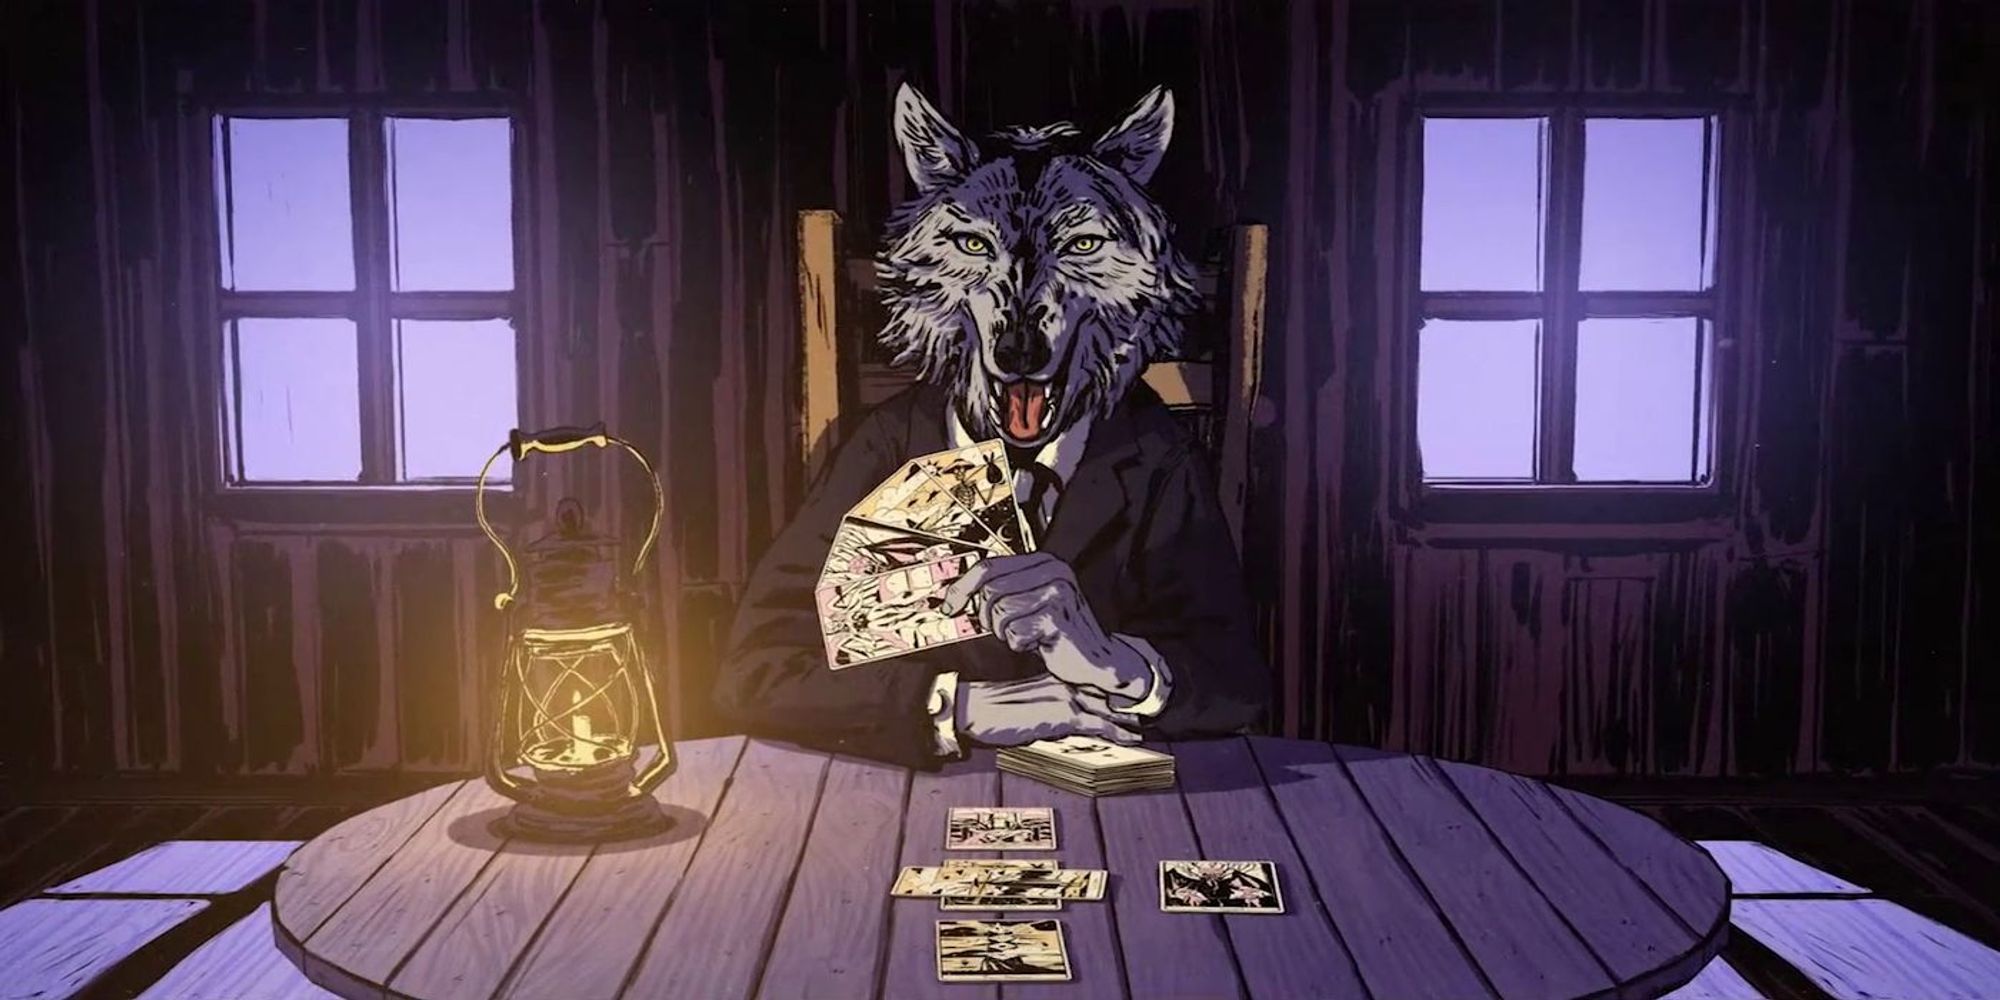 Wolf playing cards in dimly lit room 